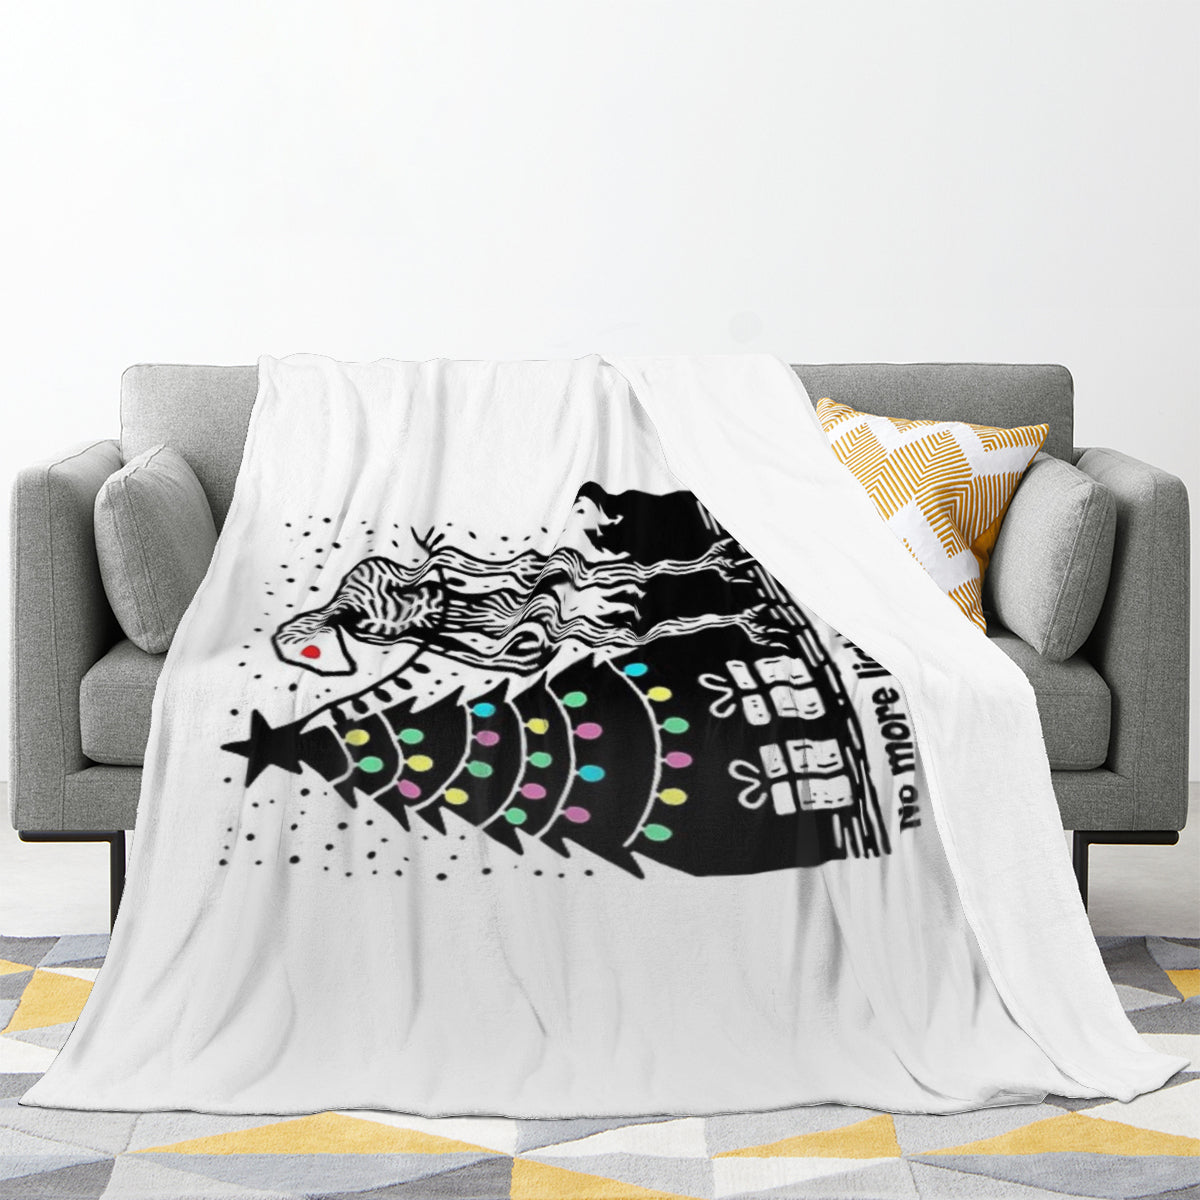 Demogorgon No more lights and gifts never again Throw Blanket